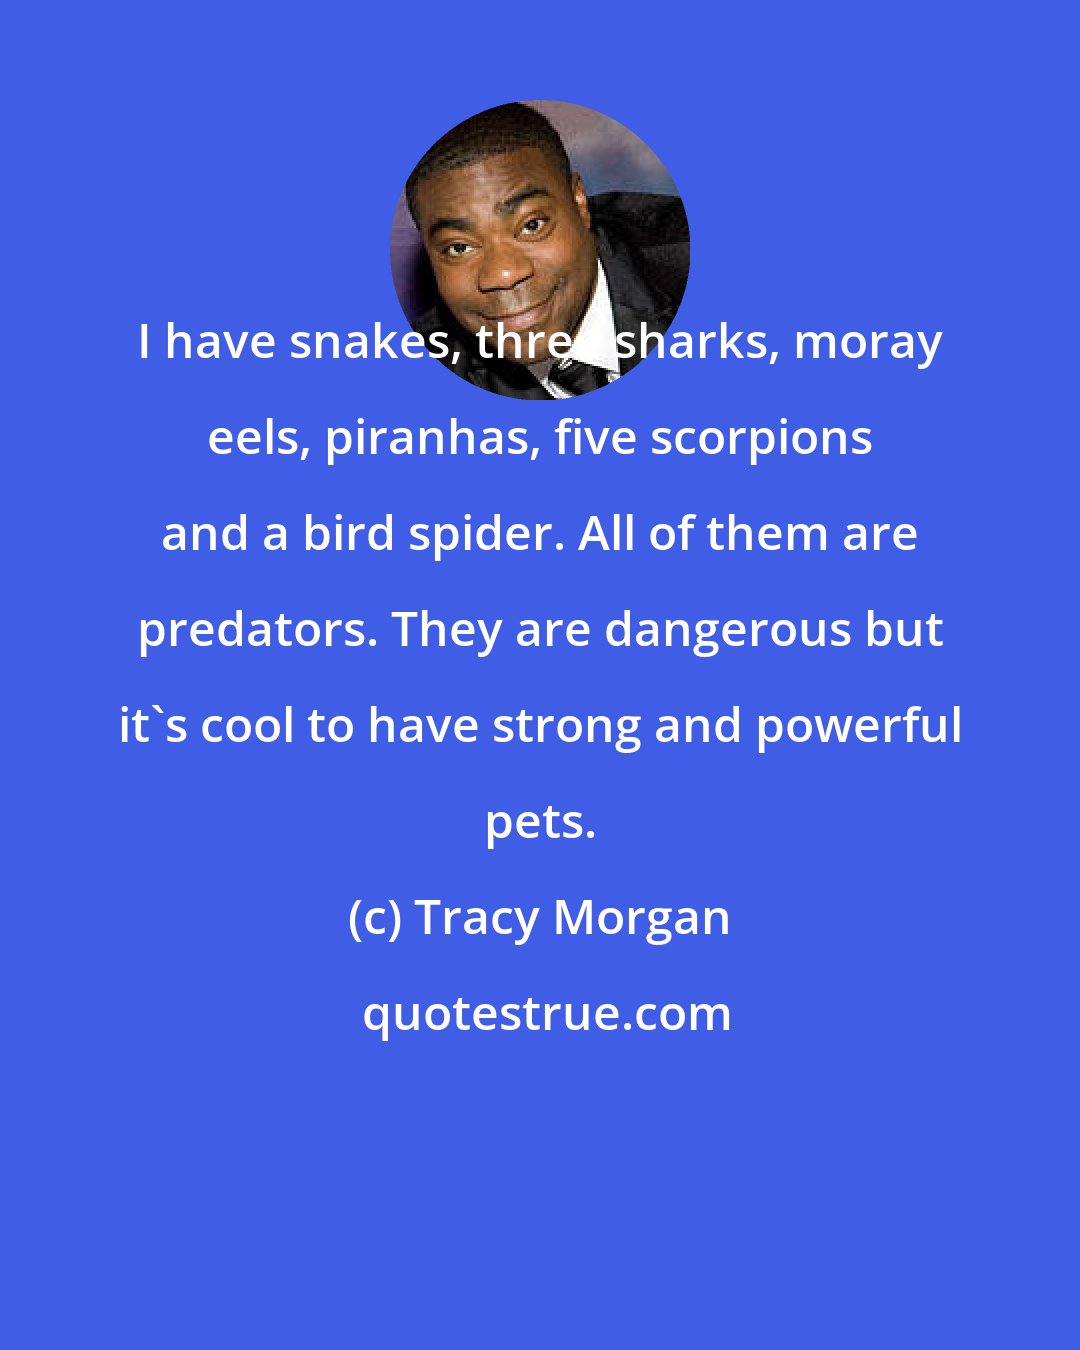 Tracy Morgan: I have snakes, three sharks, moray eels, piranhas, five scorpions and a bird spider. All of them are predators. They are dangerous but it's cool to have strong and powerful pets.